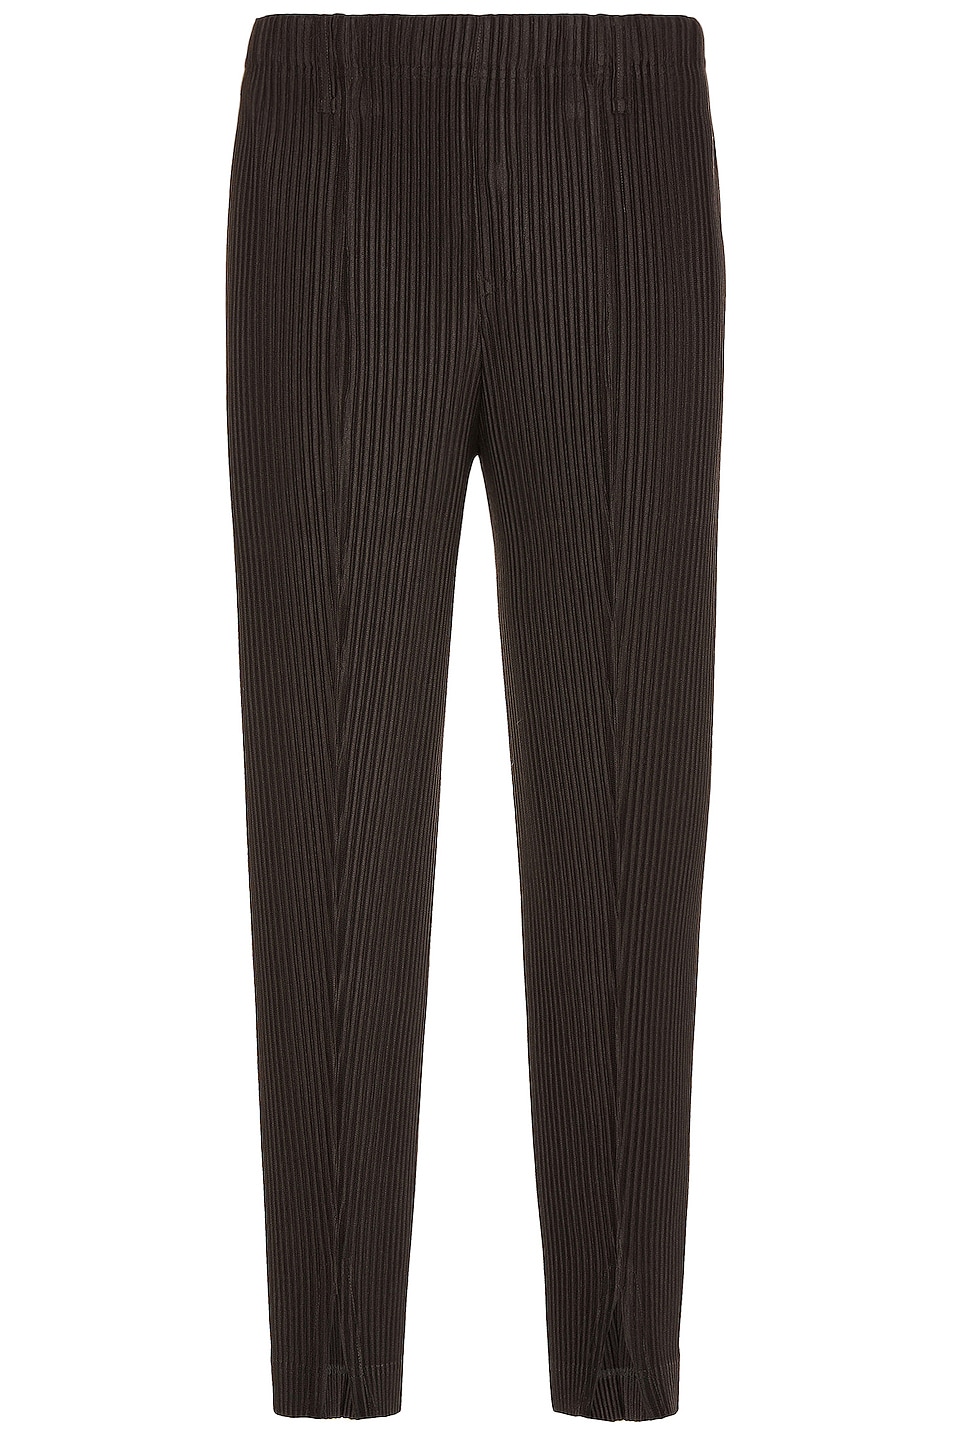 Image 1 of Homme Plisse Issey Miyake Solid Pleats Pants in Charcoal